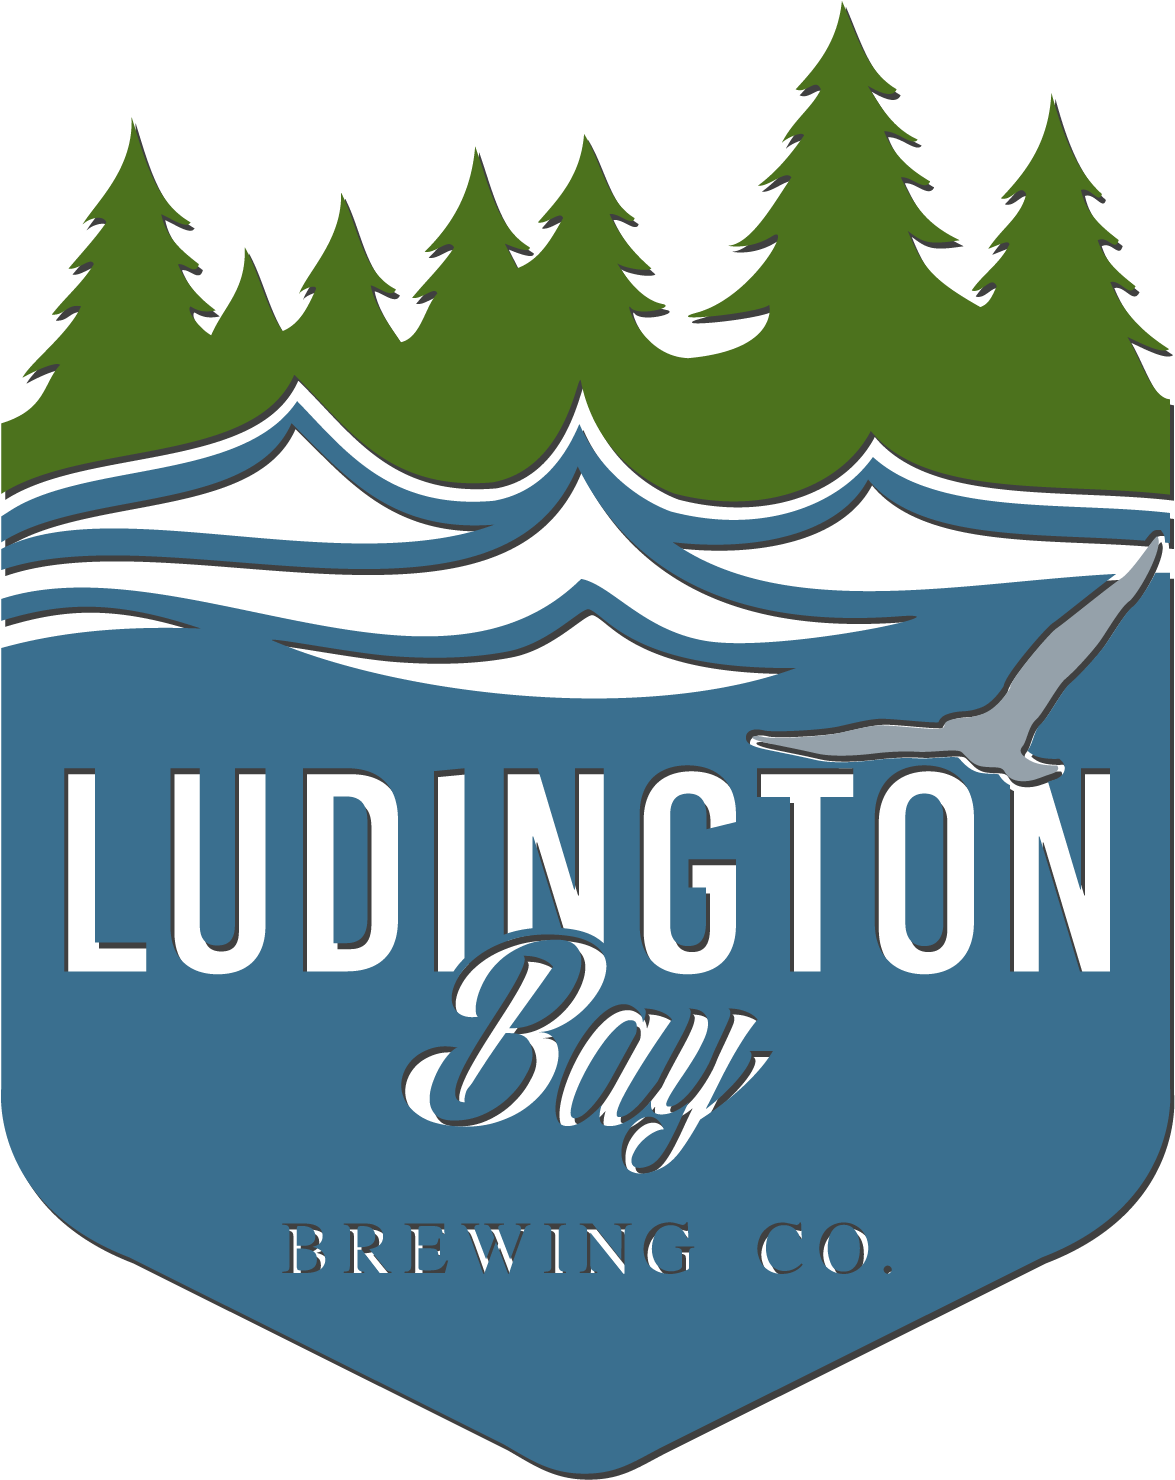 Image Is Not Available - Ludington Bay Brewing Co (1444x1744)